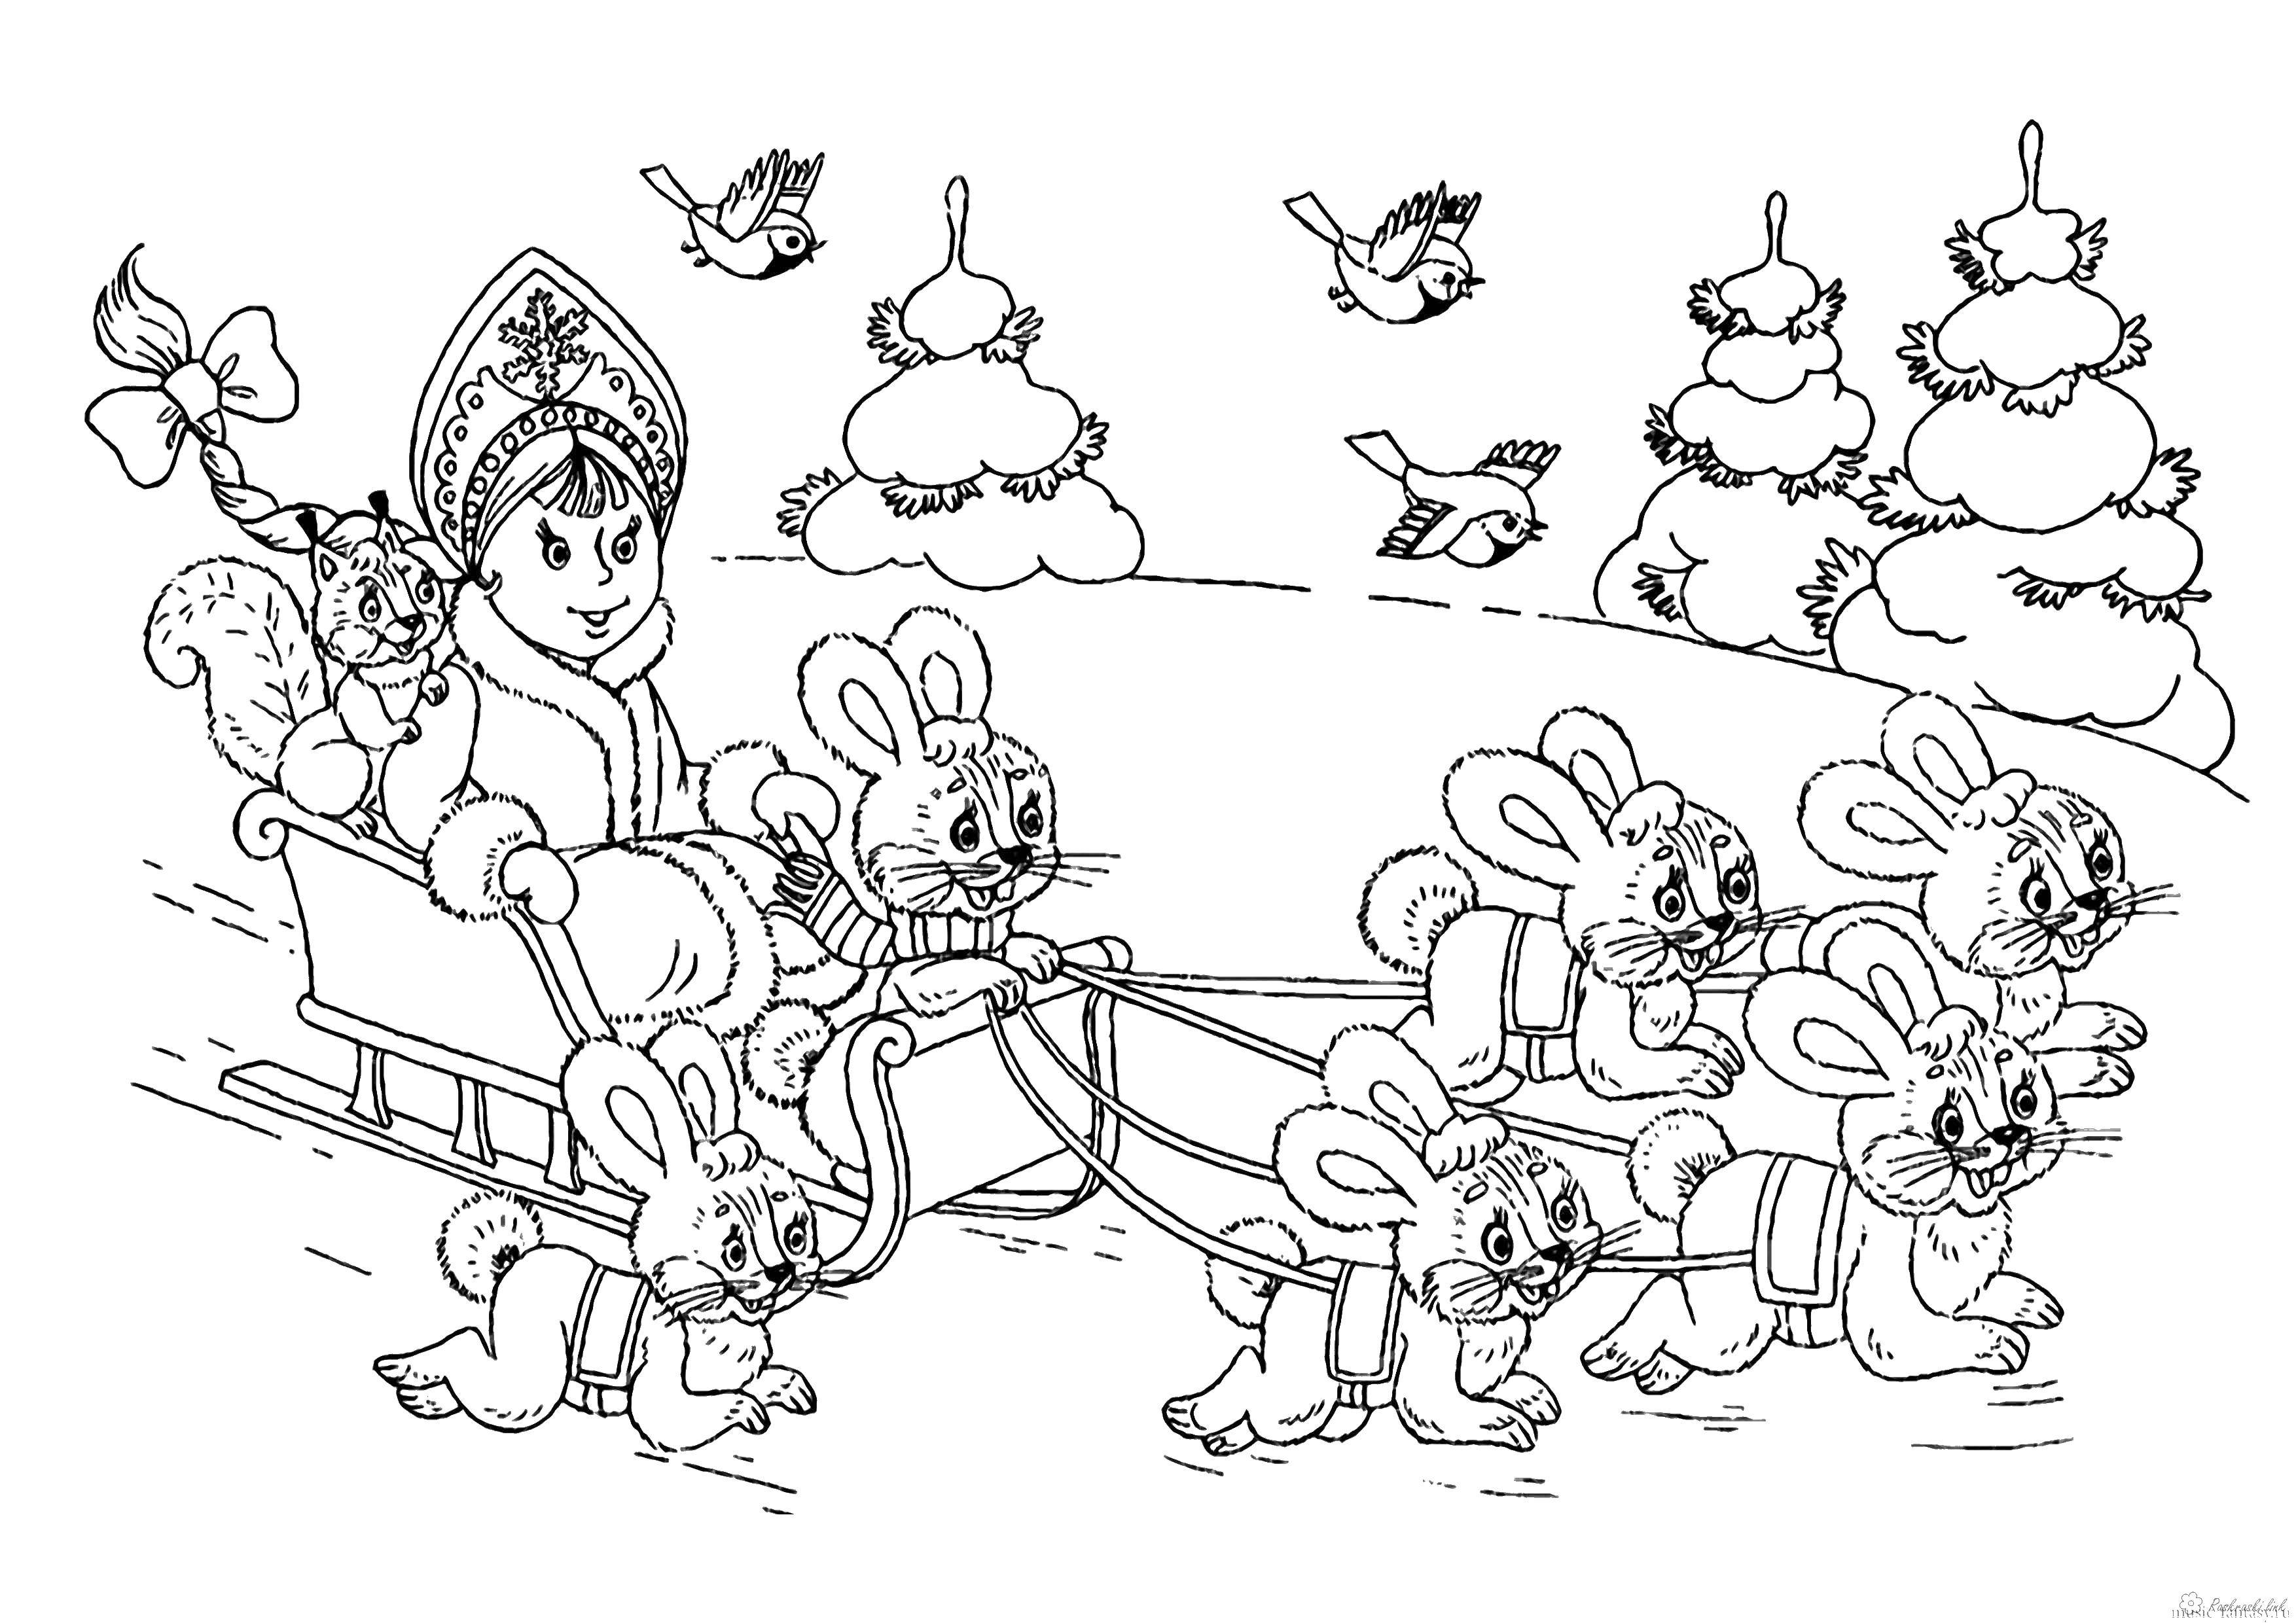 Coloring Snow maiden on a sled with rabbits. Category snow. Tags:  snowman, children.